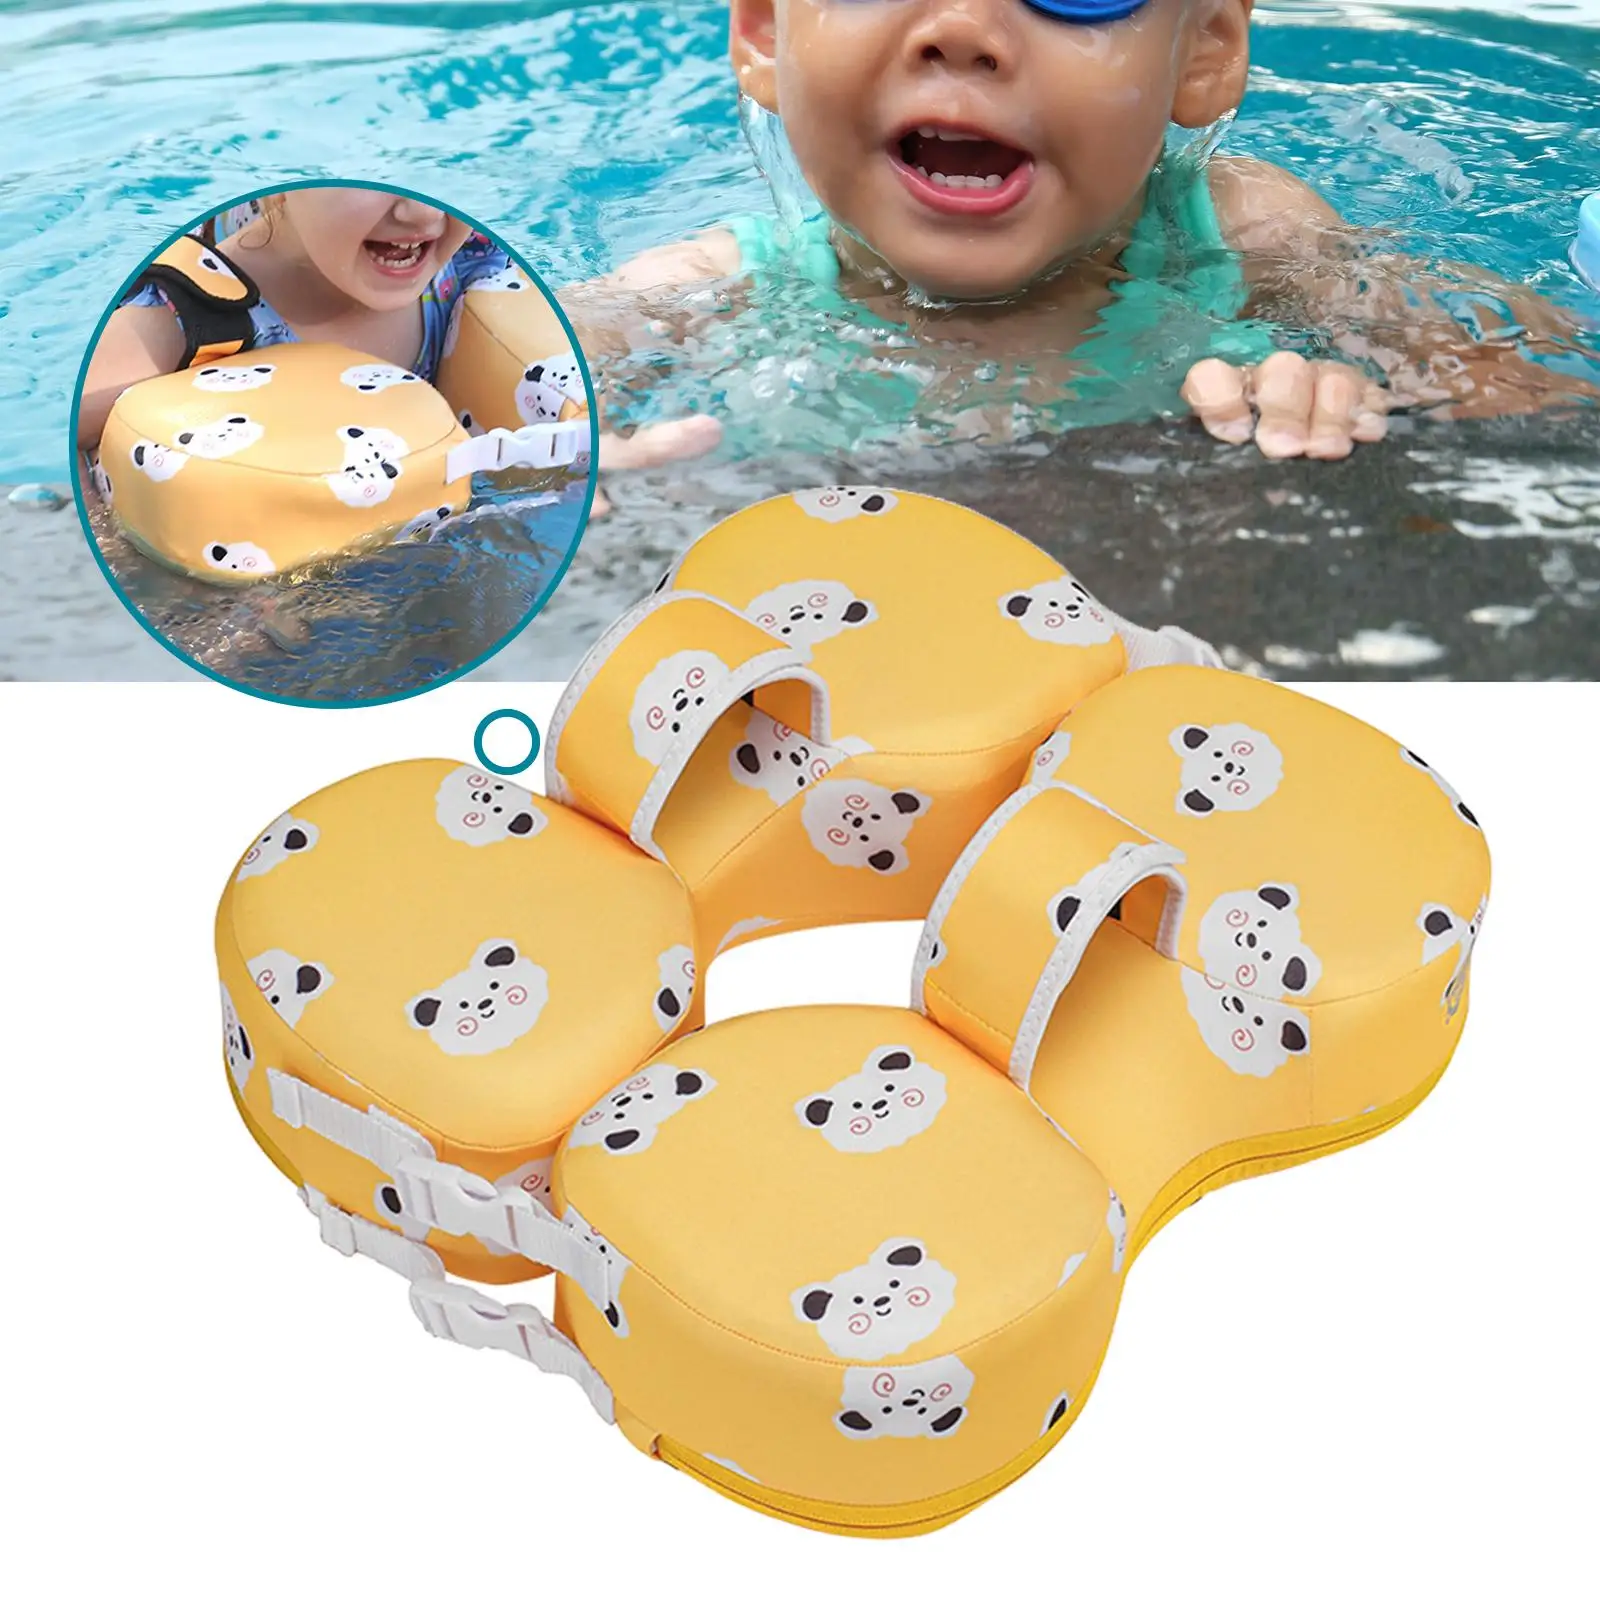 Baby Swimming Training Float Pool Floats Water Toy Within 5 Years Old Toddlers Floats for Toddlers Baby Kids Newborn Infant